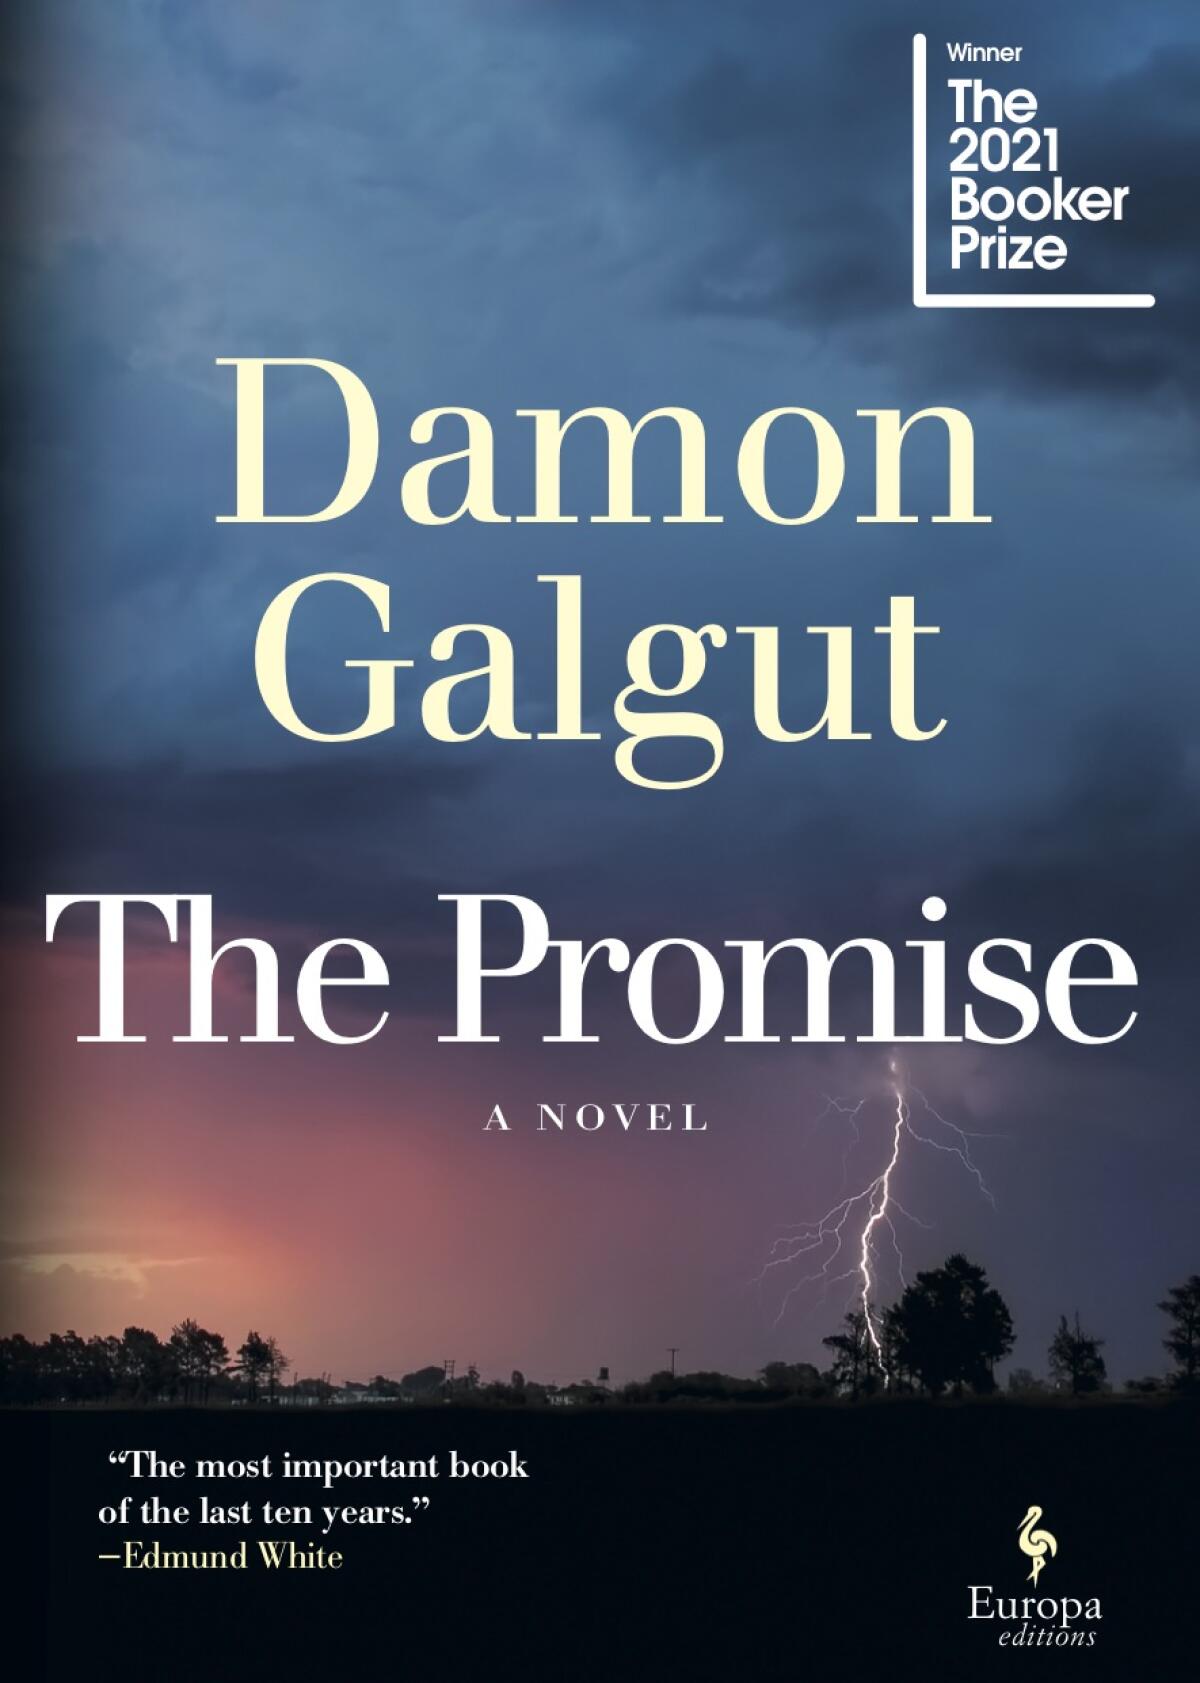 A stormy sky with lightning on the cover of "The Promise," by Damon Galgut.